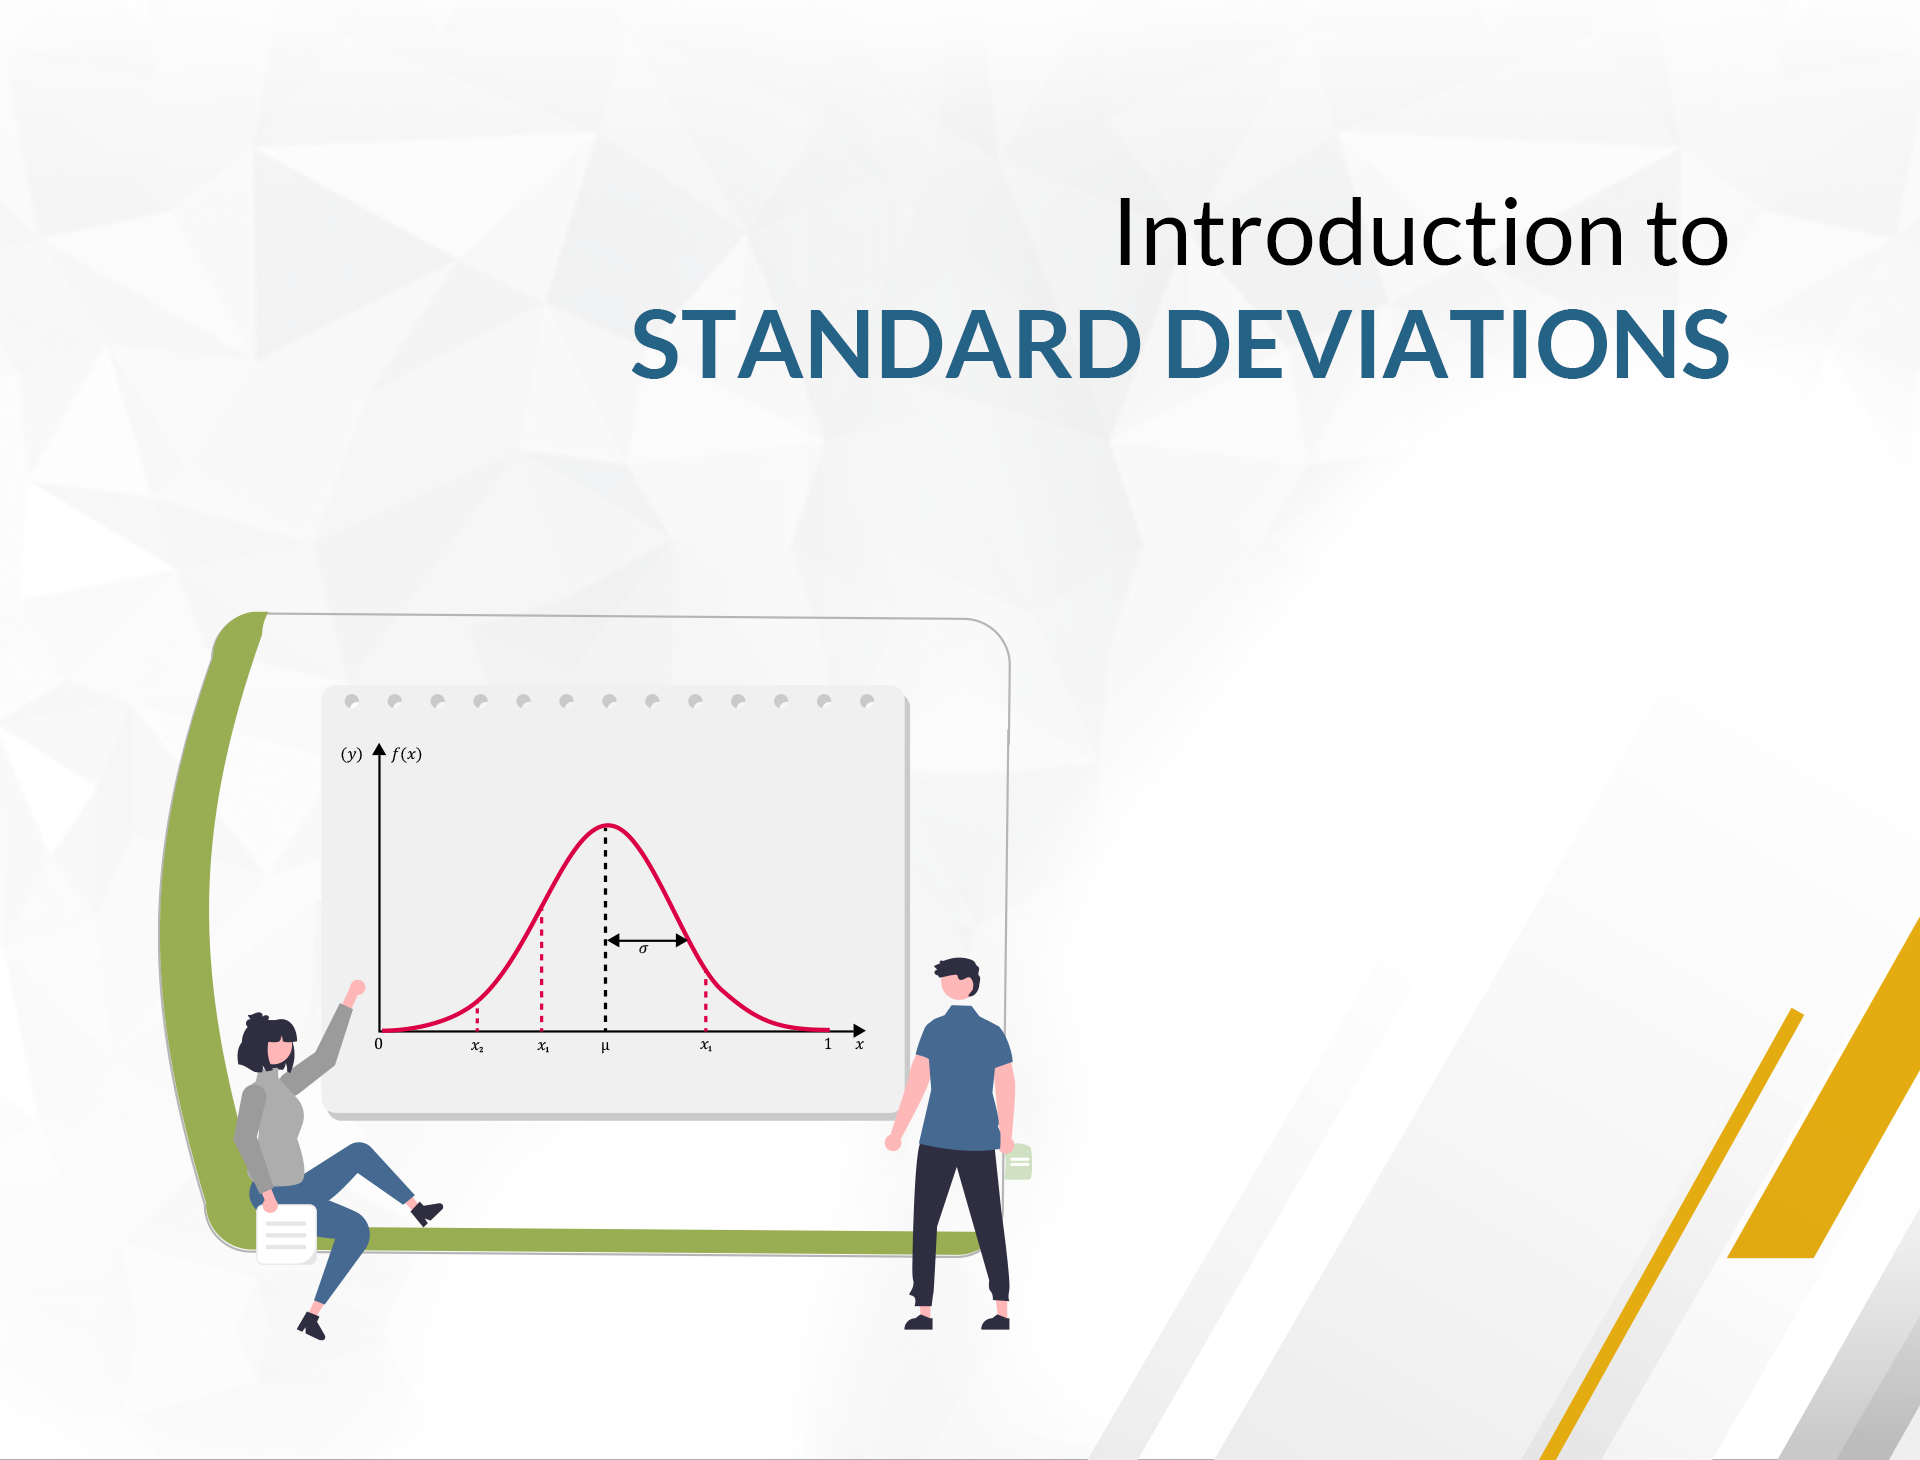 Introduction to Standard Deviations